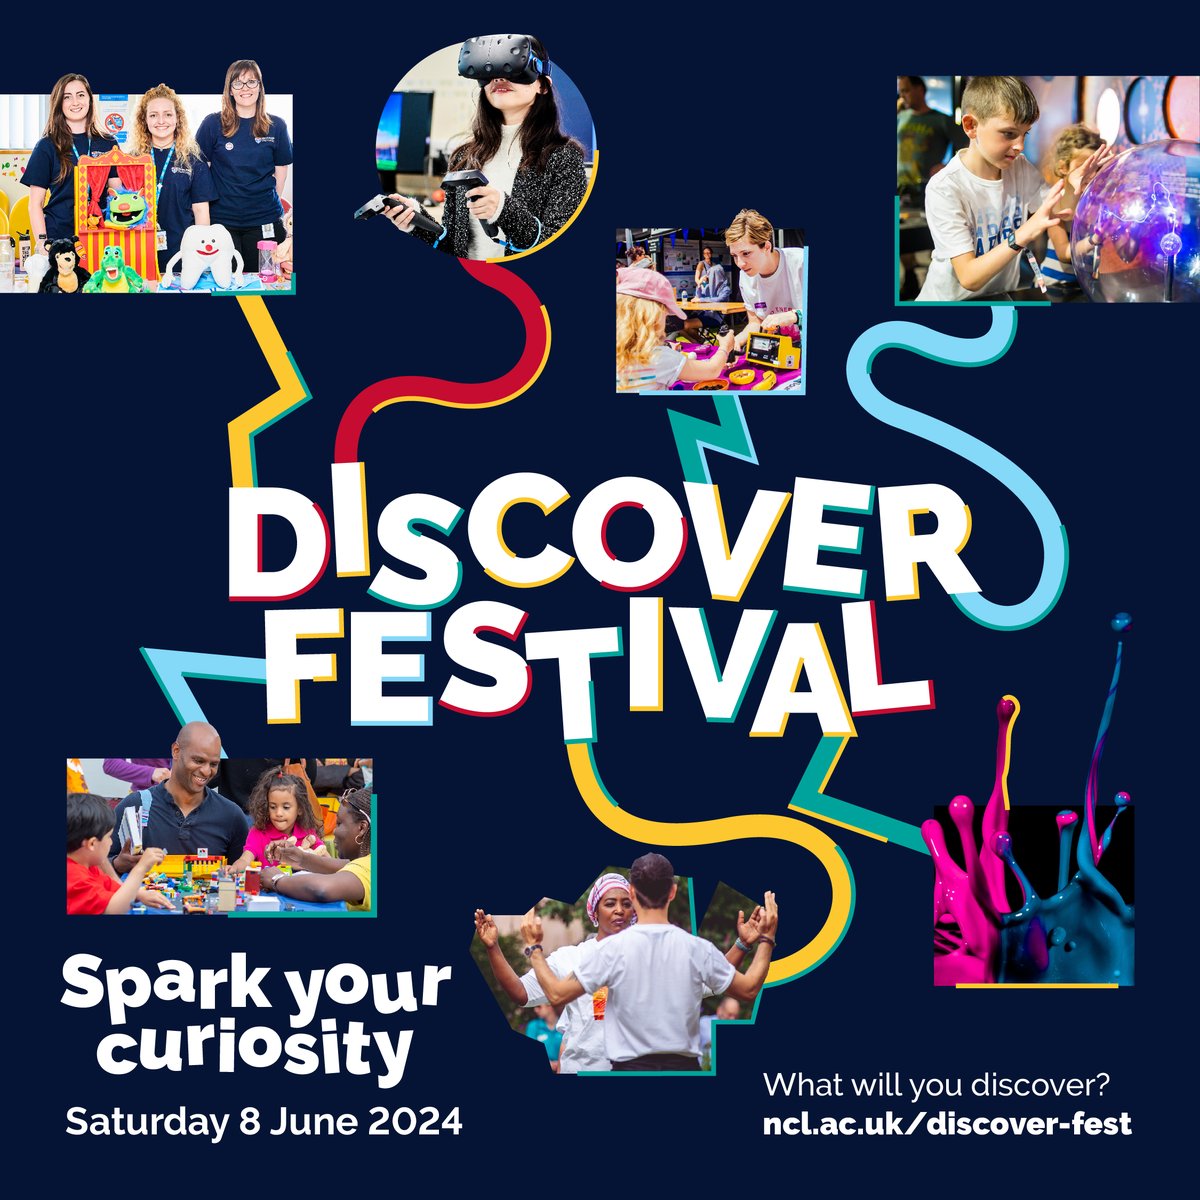 Prepare yourself for an exhilarating experience at the Discover Festival 

@NCLDietetics will be talking all things body composition and debunking nutrition myths in a fun and engaging way

📍Lindisfarne Room @UniofNewcastle 
📅Saturday 8th June

Get ready to discover and learn!